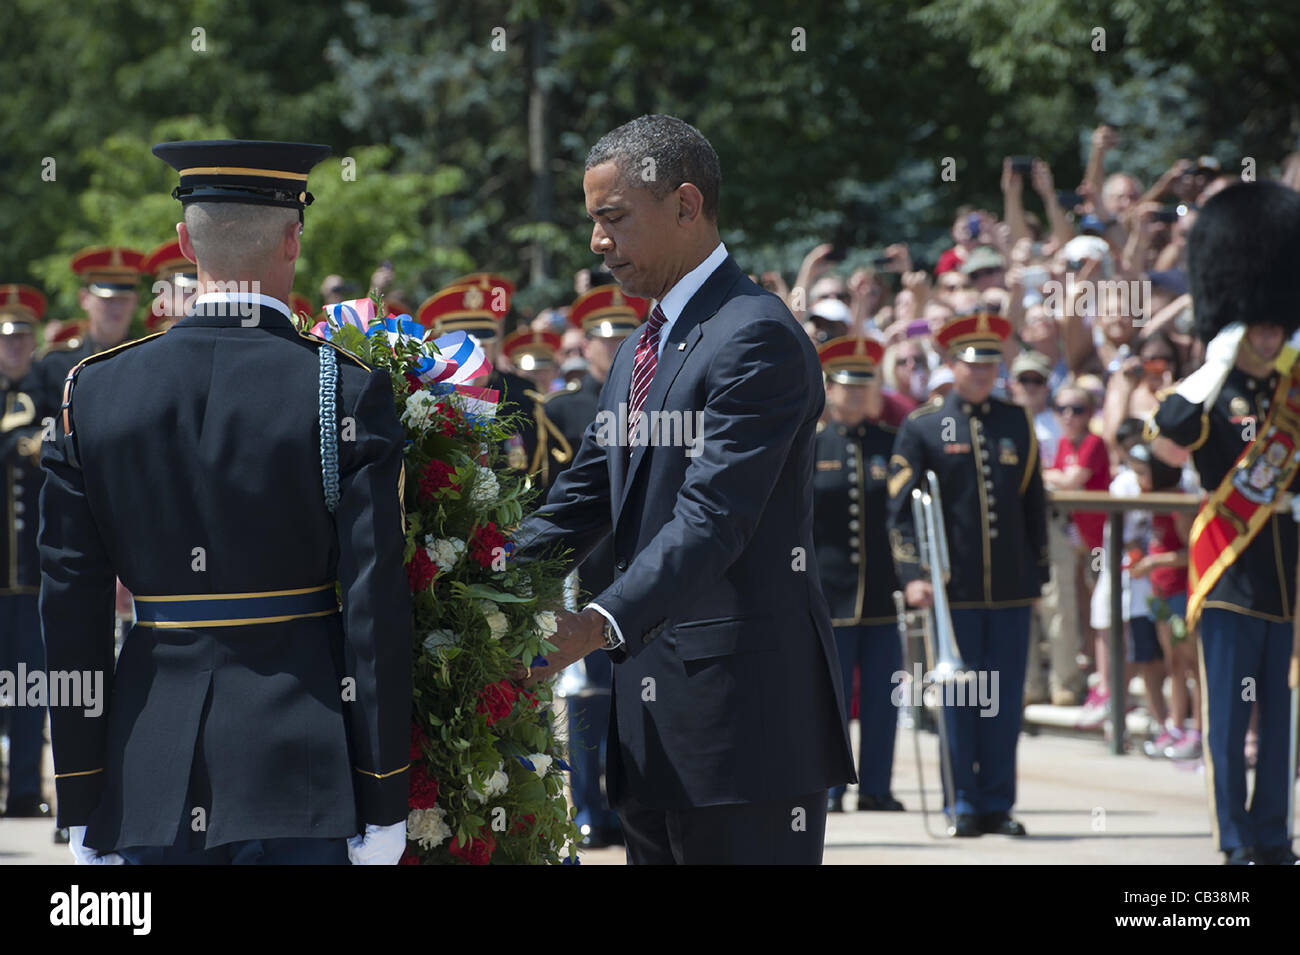 US President Barack Obama places a wreath at the Tomb of the Unknowns in honor of Memorial Day at Arlington National Cemetery May 28, 2012 in Arlington, VA Stock Photo